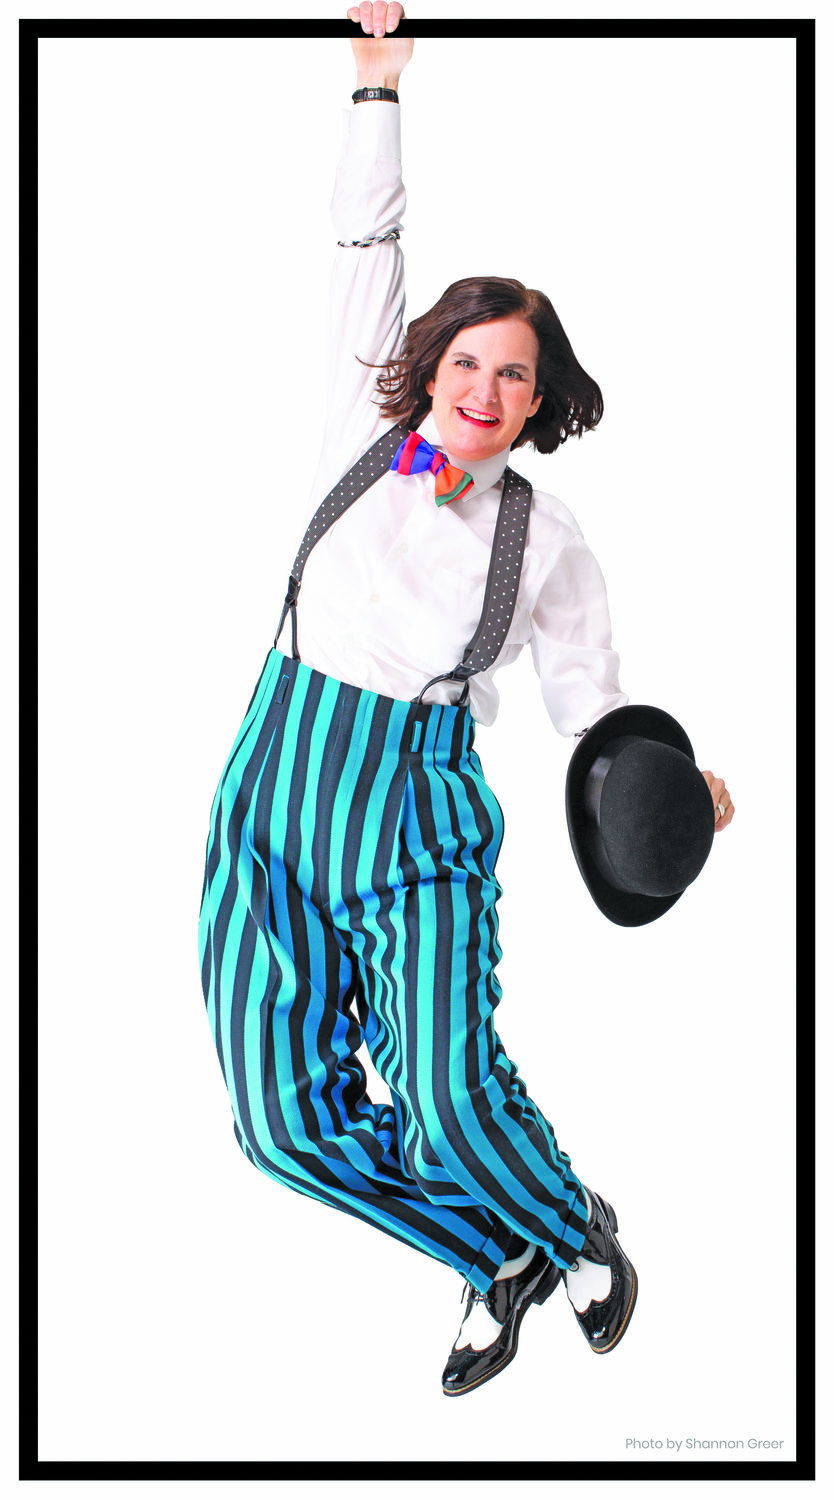 Paula Poundstone performs live at Sellersville Theater Nov. 18.